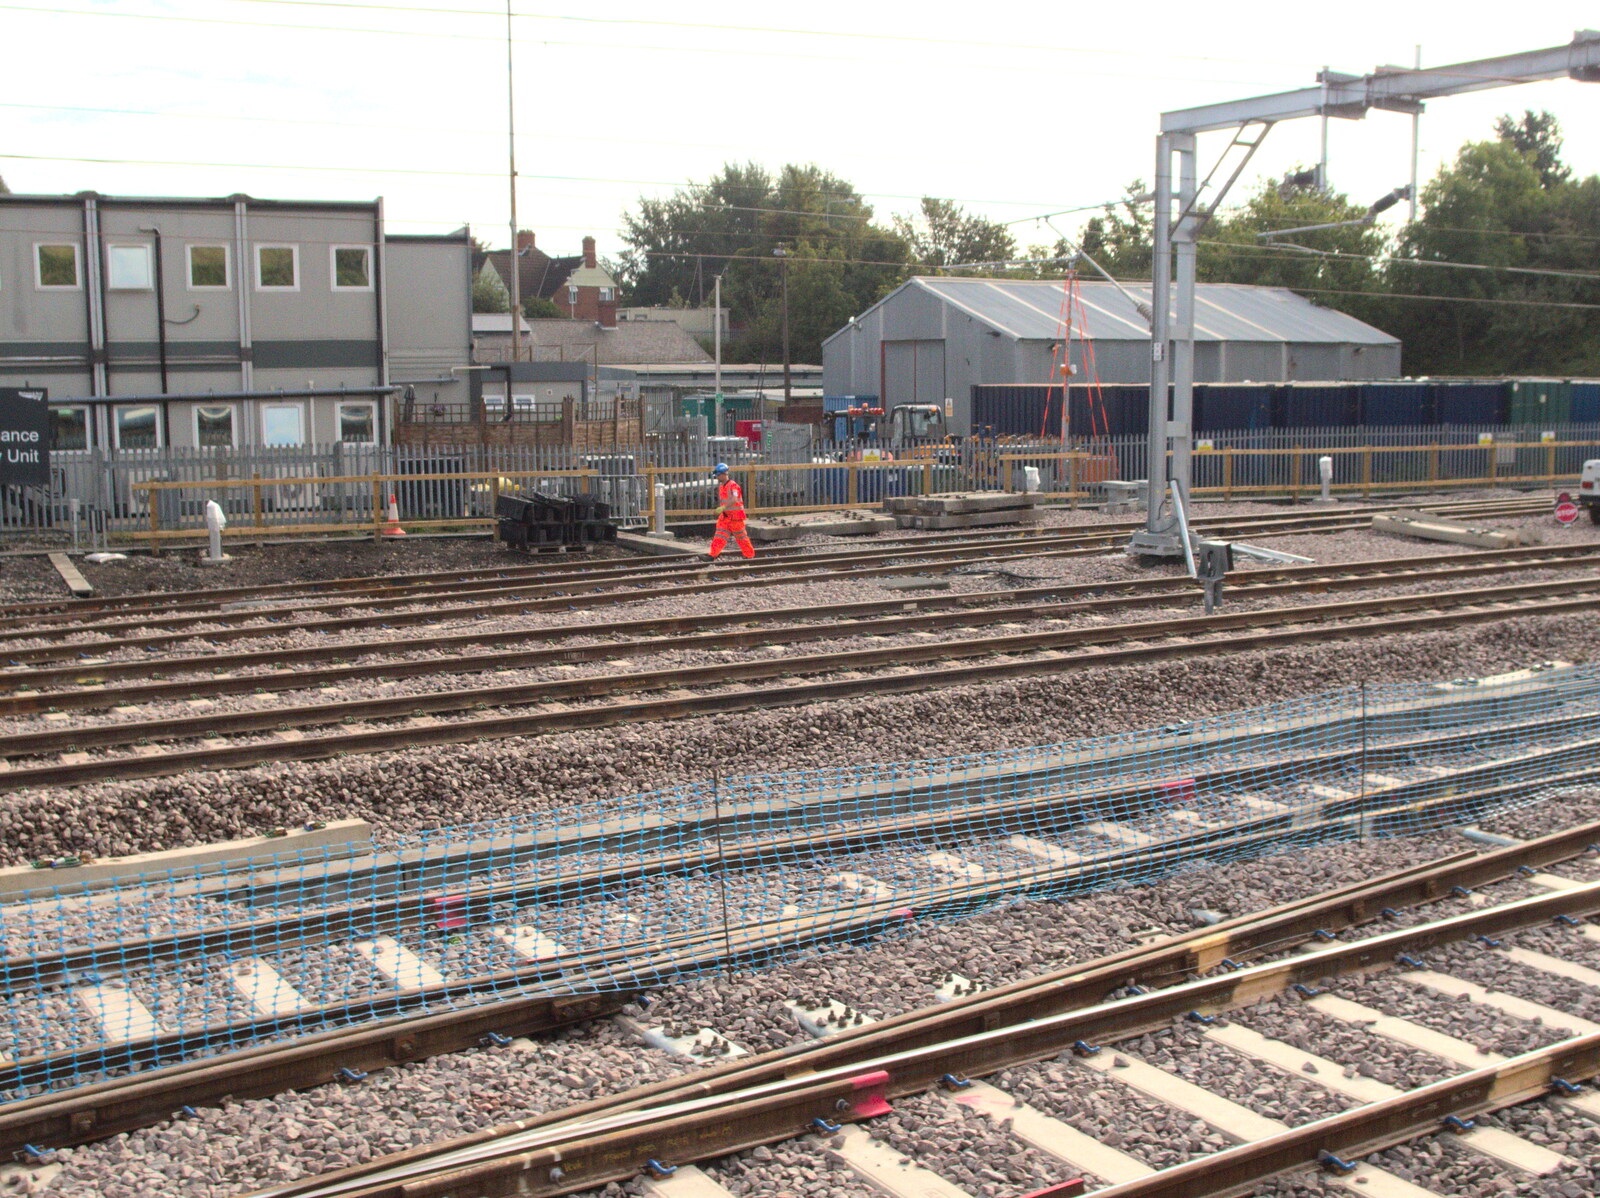 Lots of new railway track at Ipswich from New Railway and a Trip to Ikea, Ipswich and Thurrock - 19th September 2014